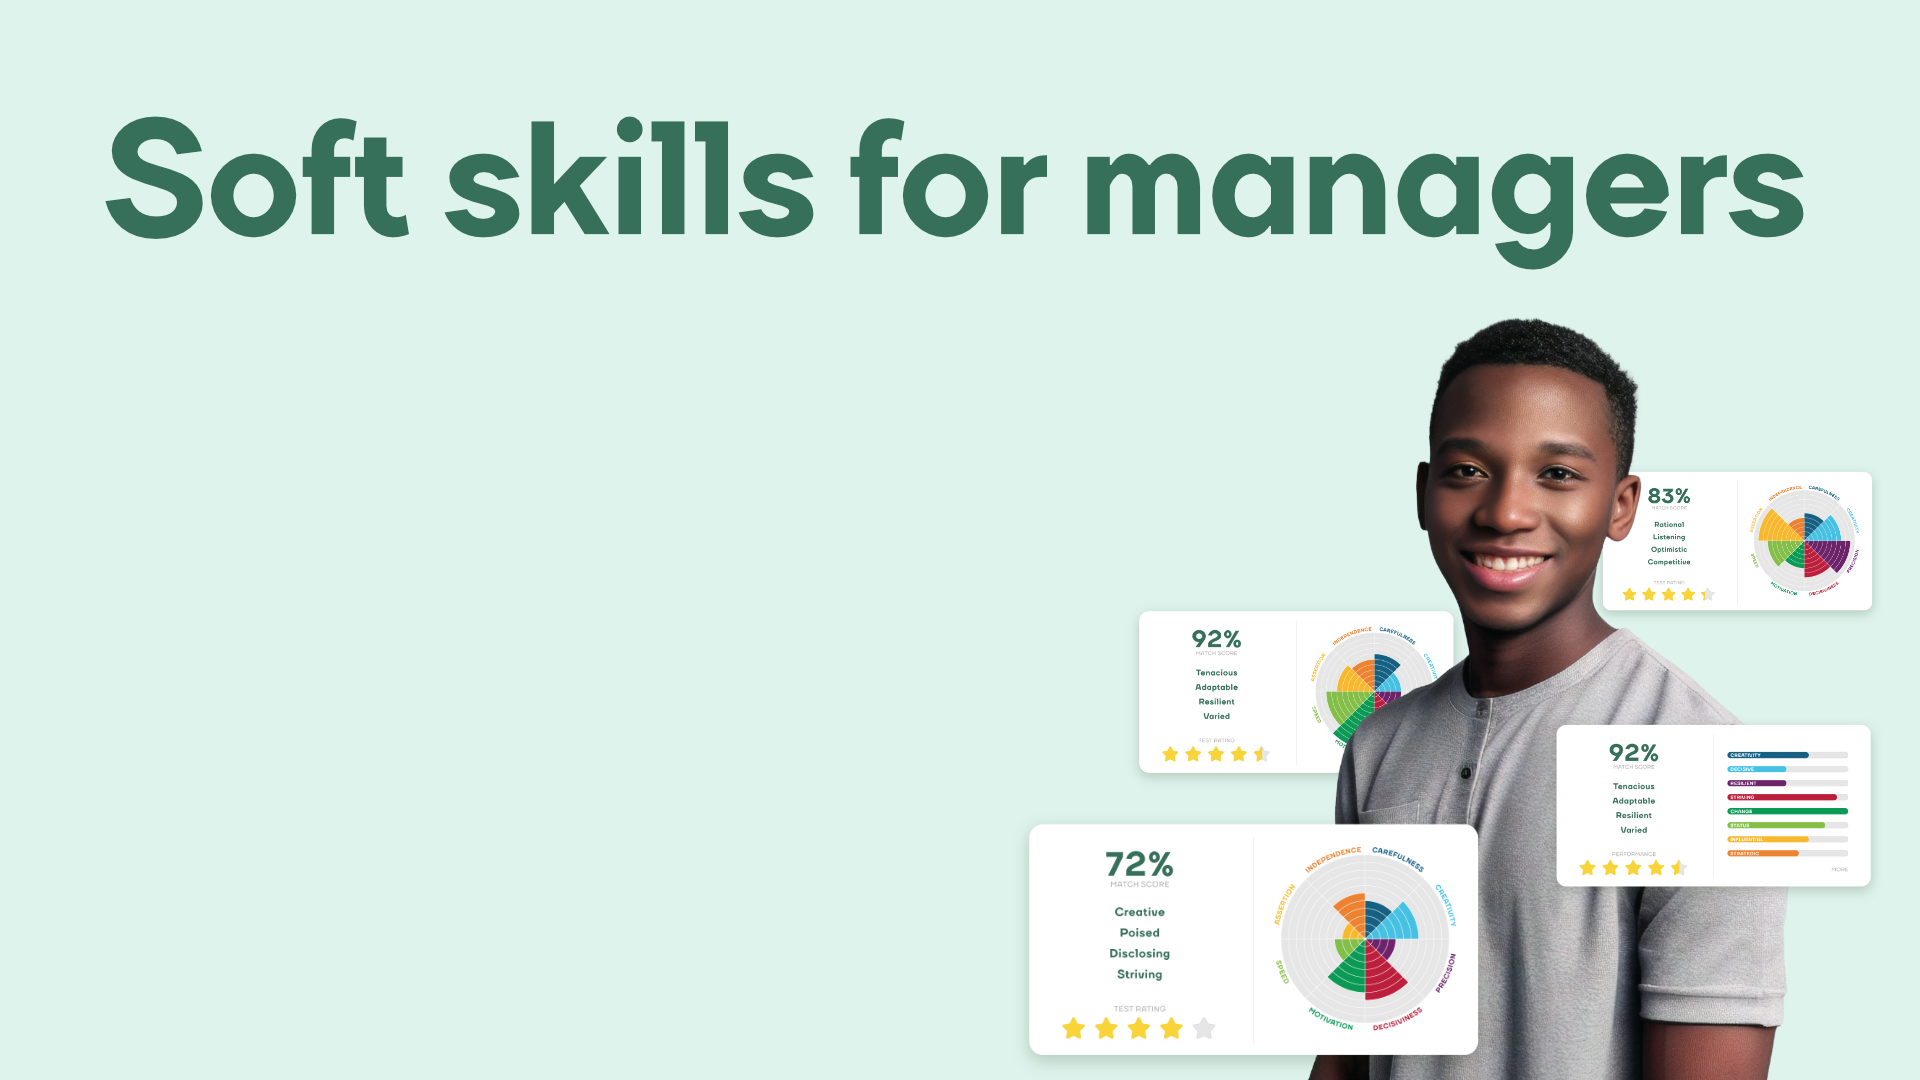 Soft skills for managers